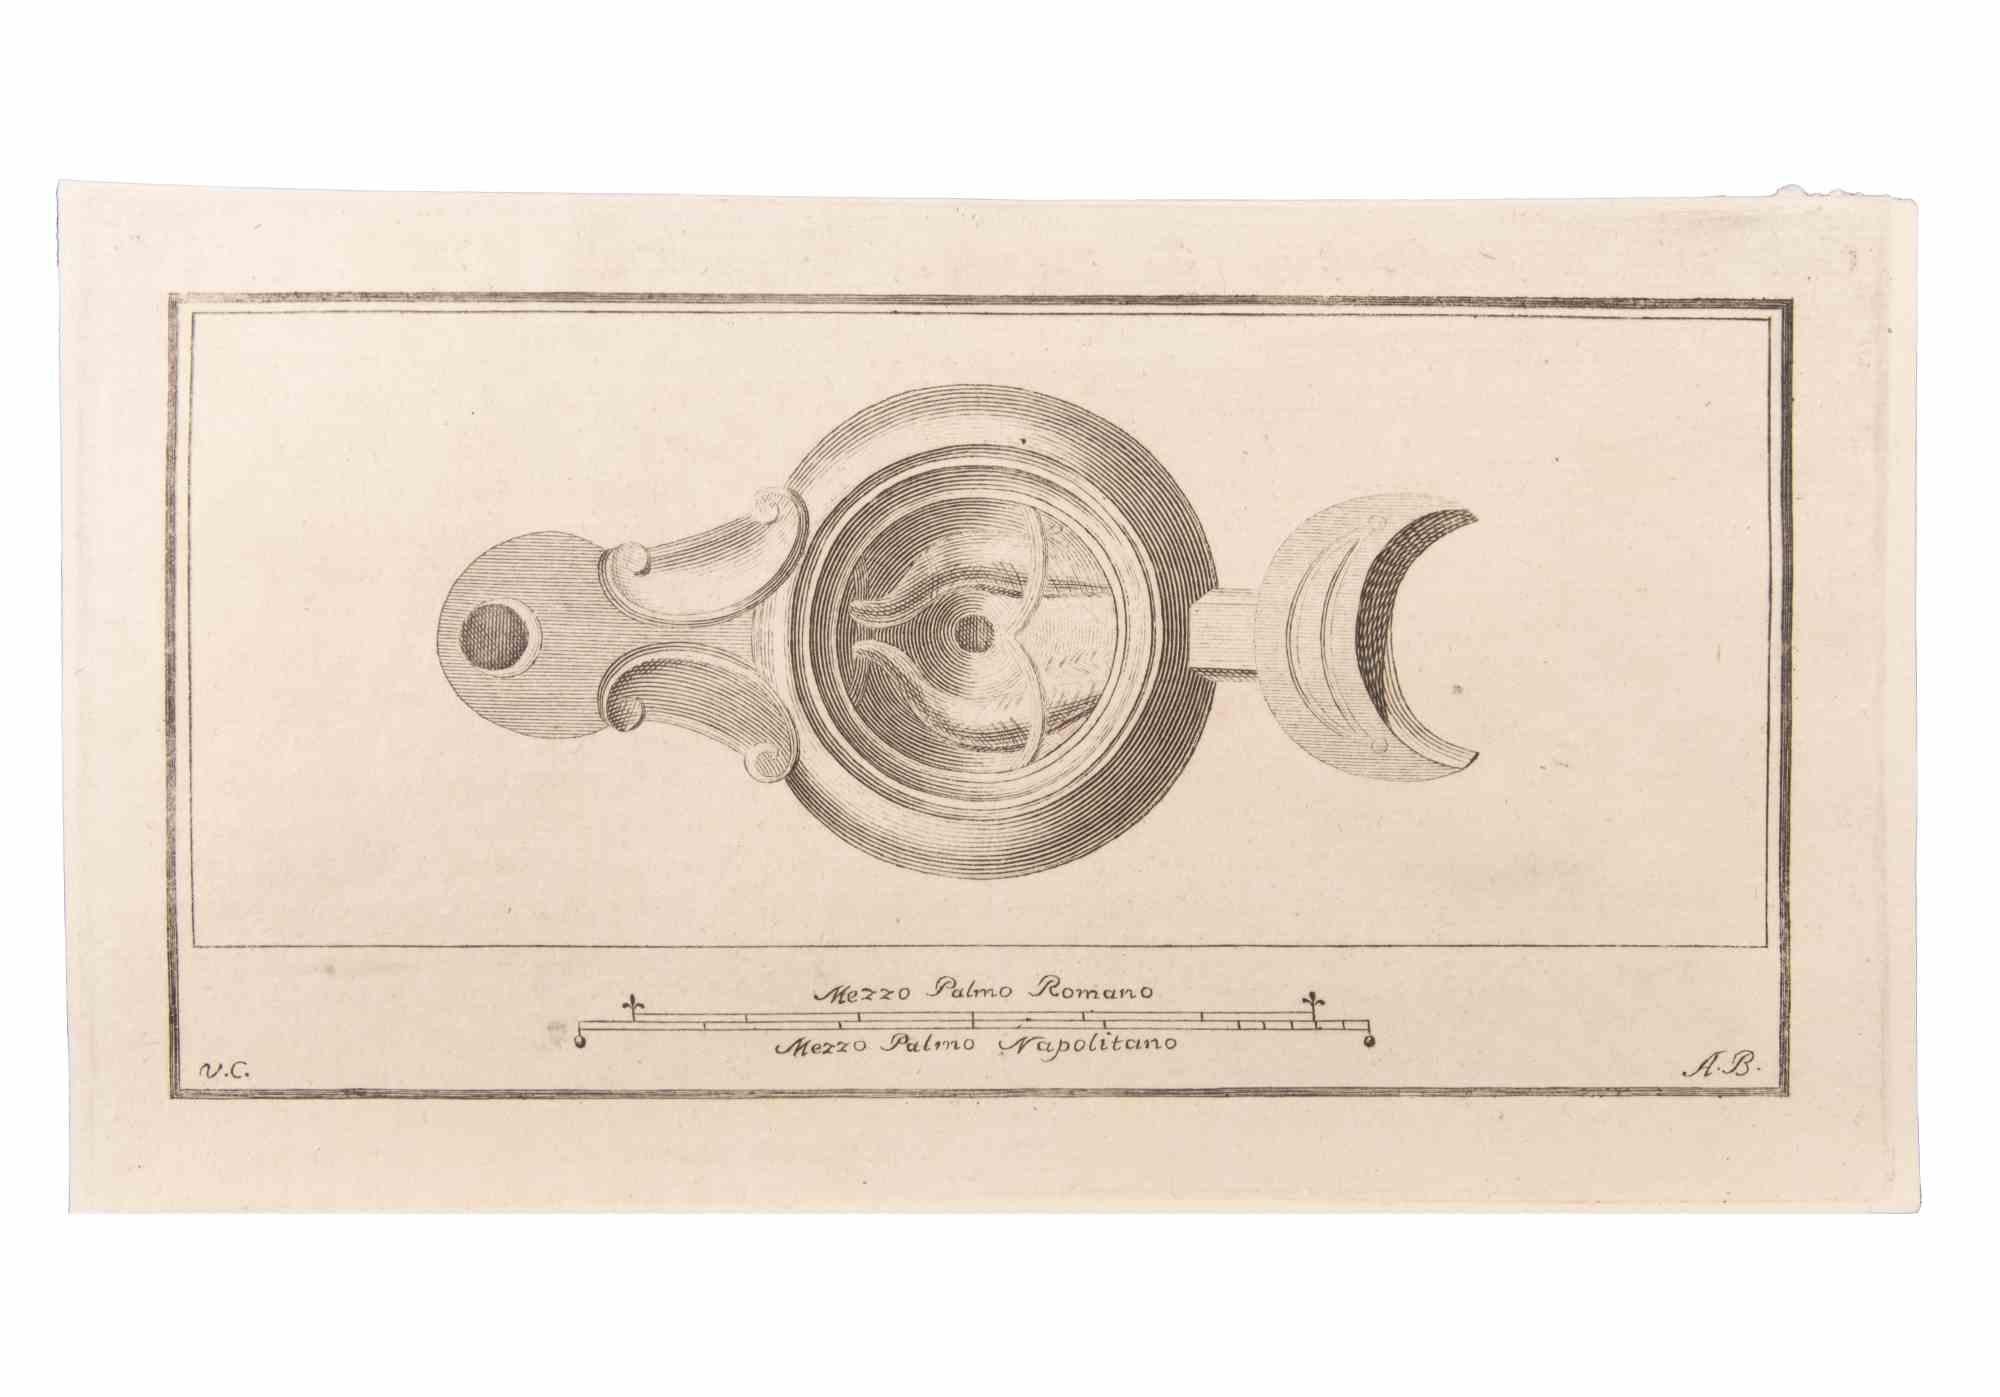 Oil Lamp is an Etching realized by  Vincenzo Campana (1730-1806).

The etching belongs to the print suite “Antiquities of Herculaneum Exposed” (original title: “Le Antichità di Ercolano Esposte”), an eight-volume volume of engravings of the finds